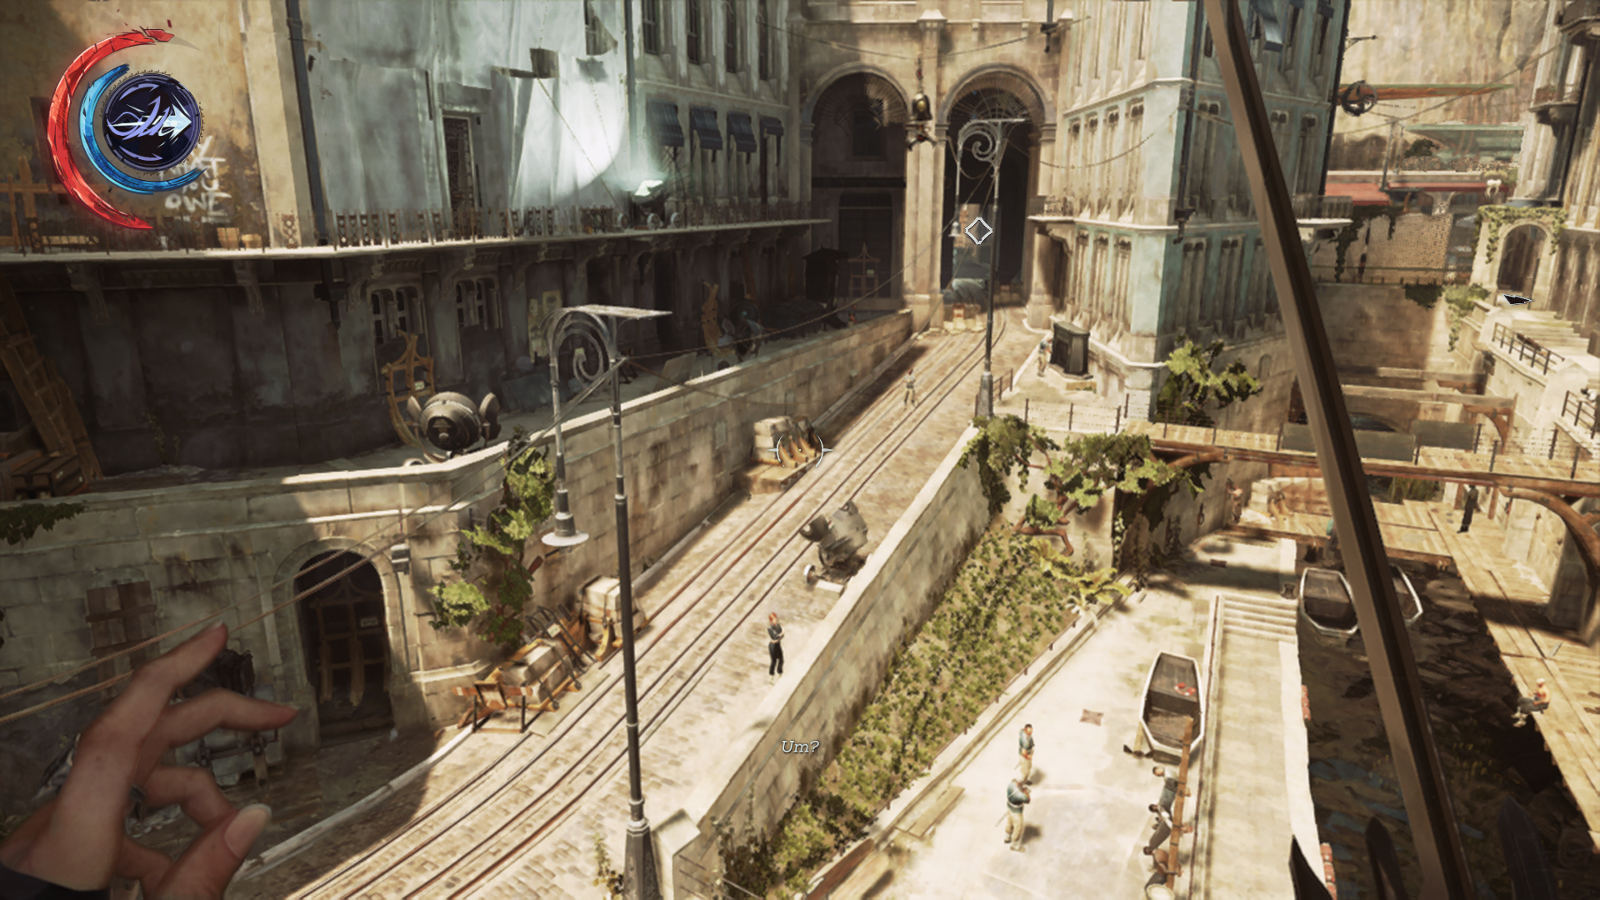 On top of the creative abilities, you also get an excellent level design in Dishonored 2